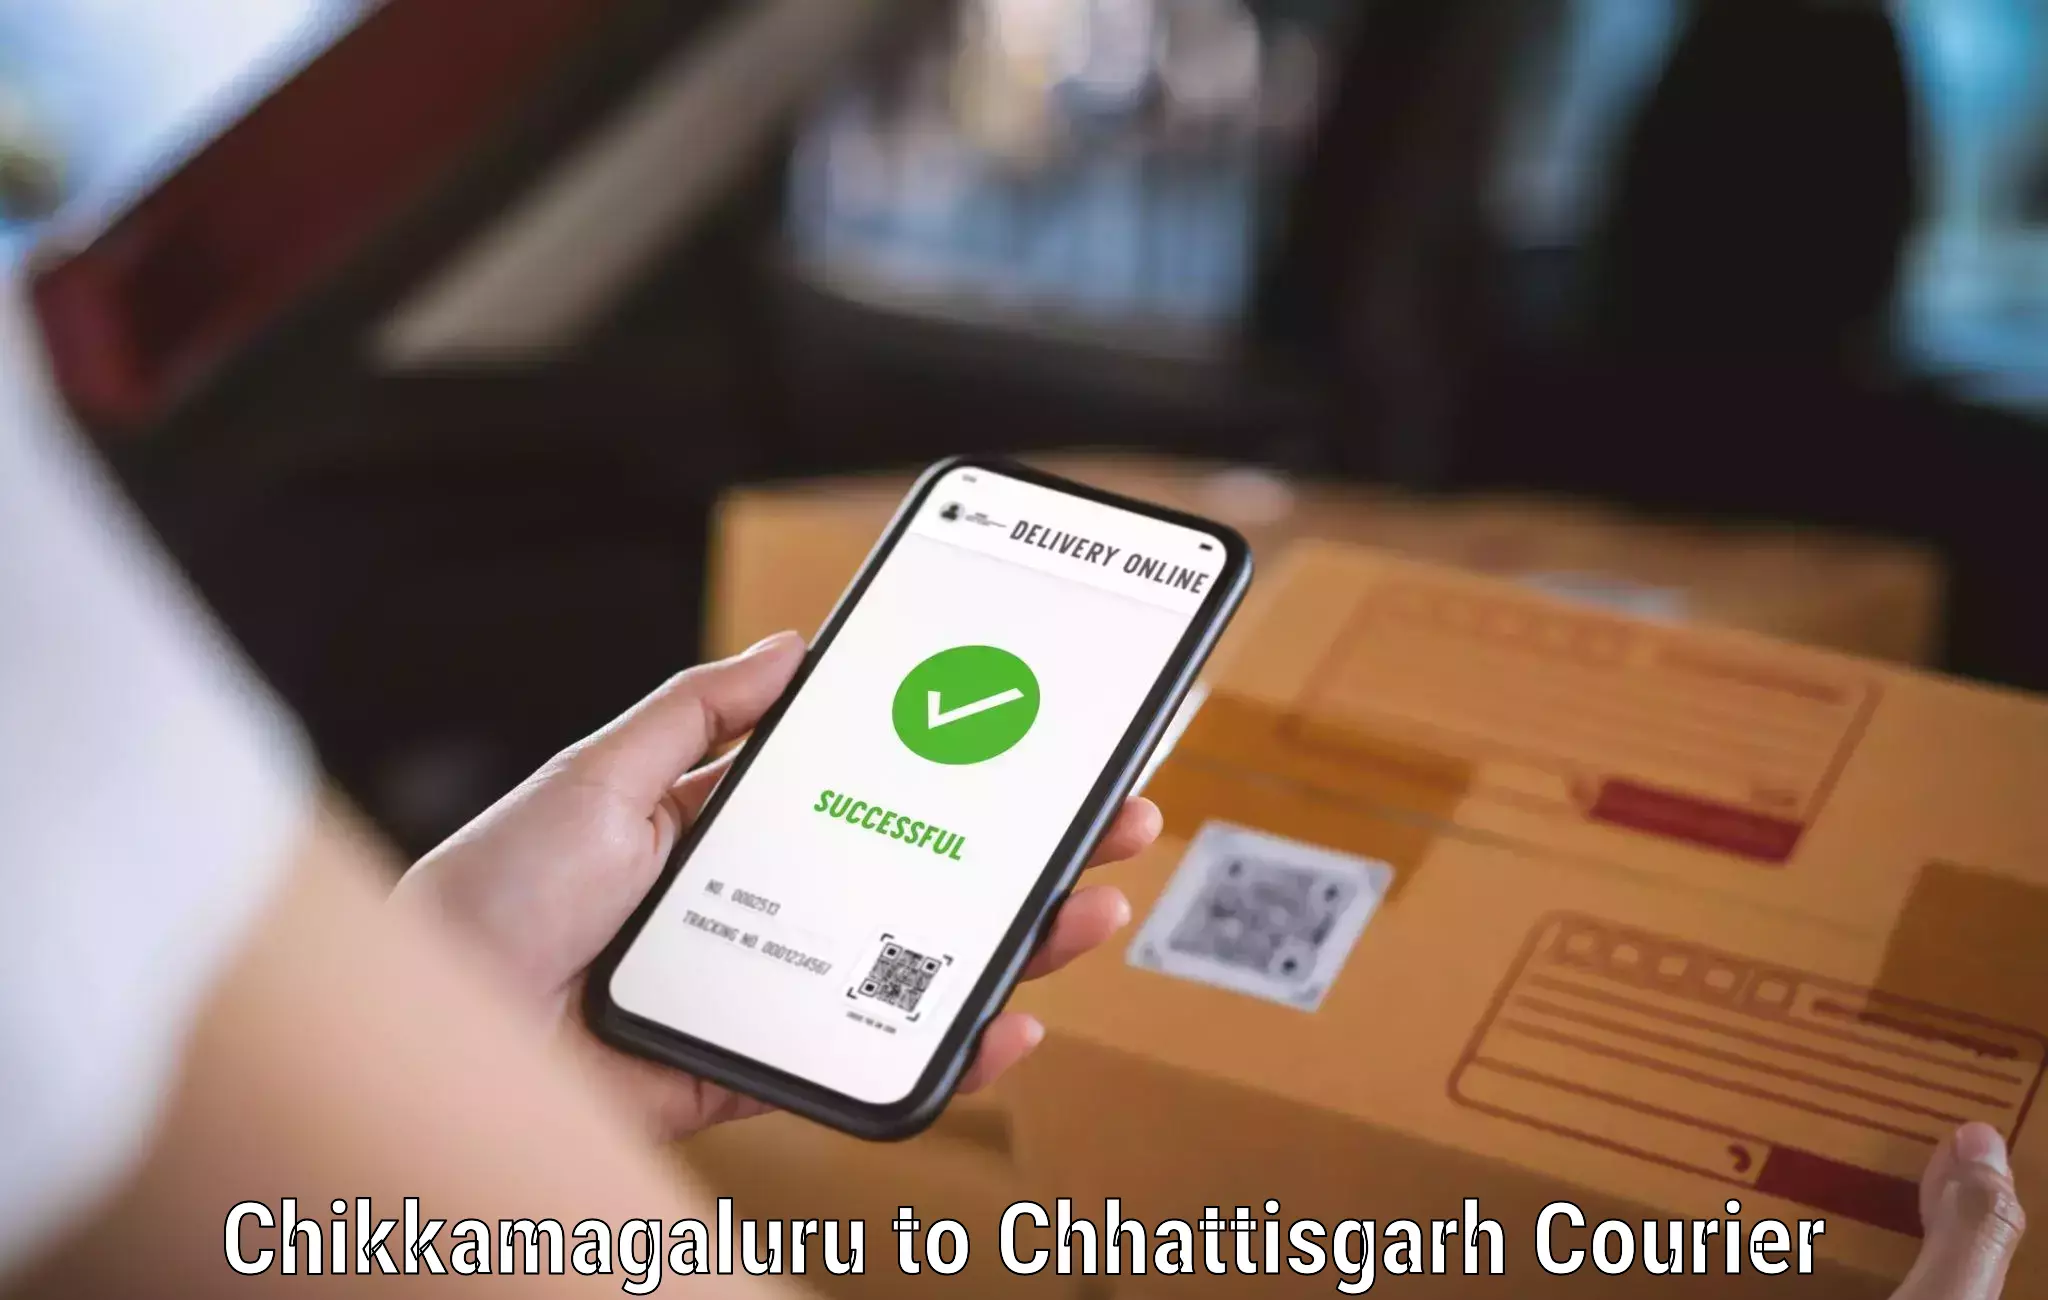 Fast delivery service Chikkamagaluru to bagbahra